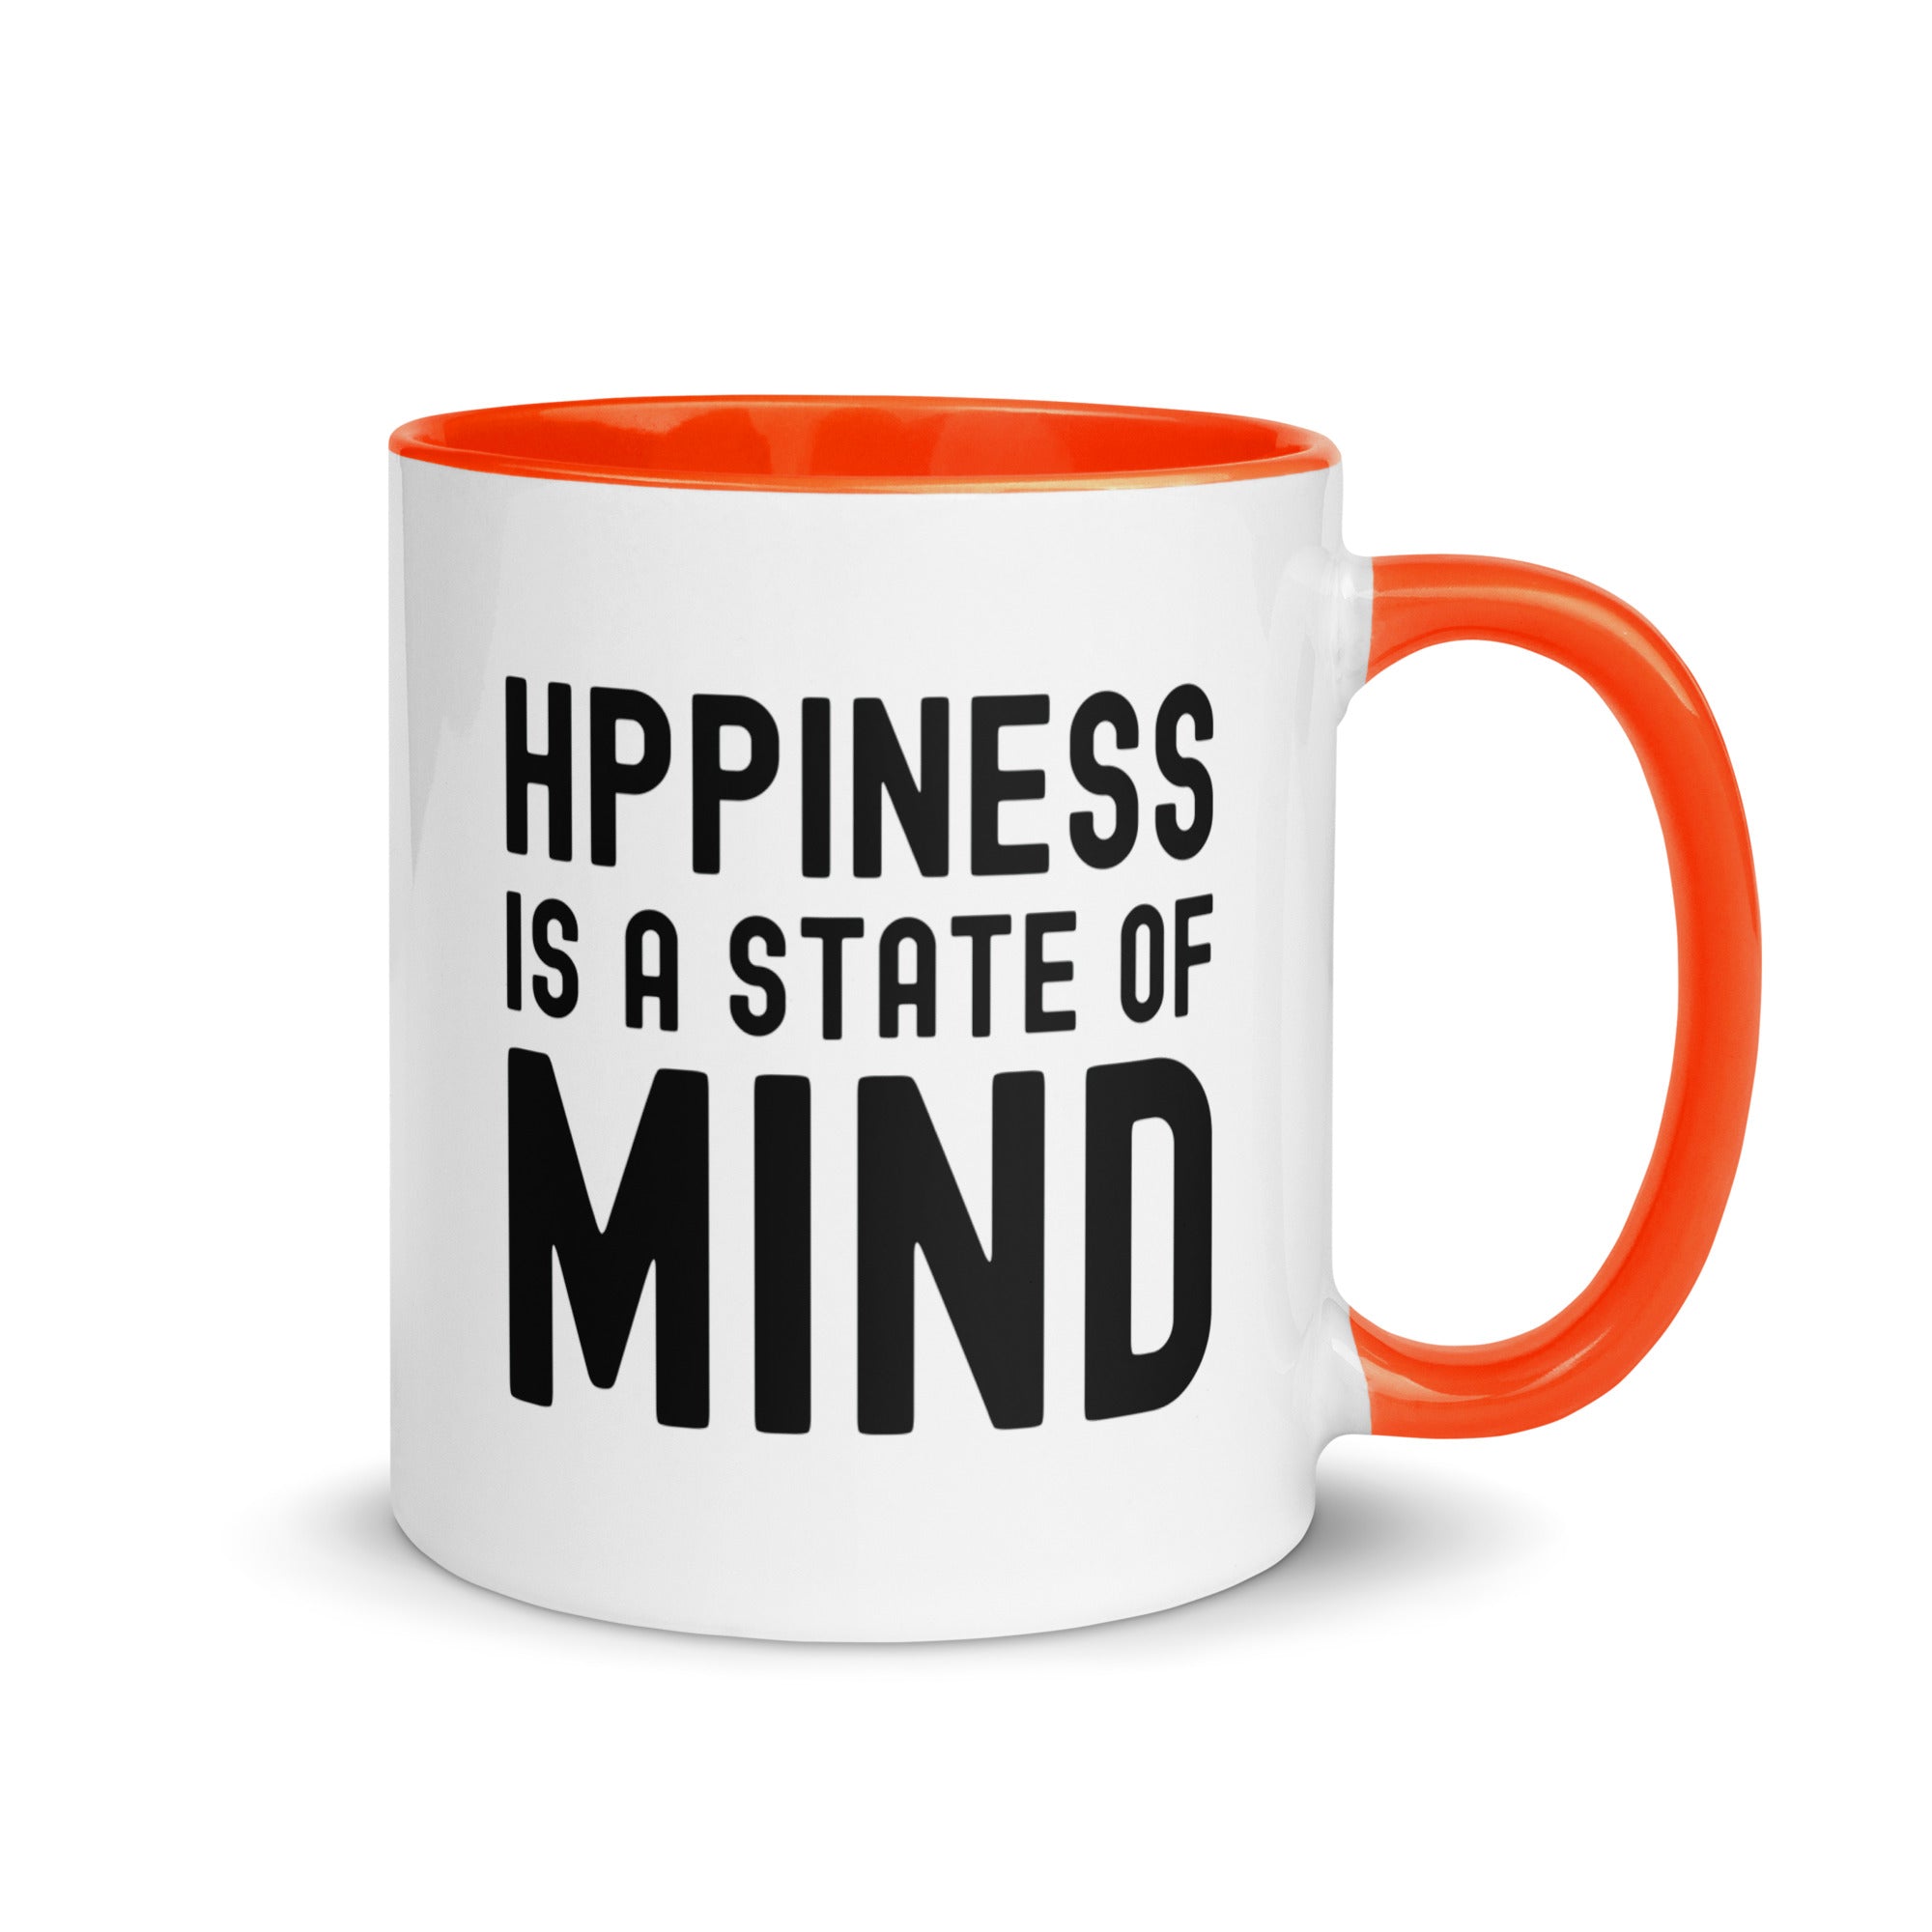 Mug with Color Inside | Hppiness is a state of mind